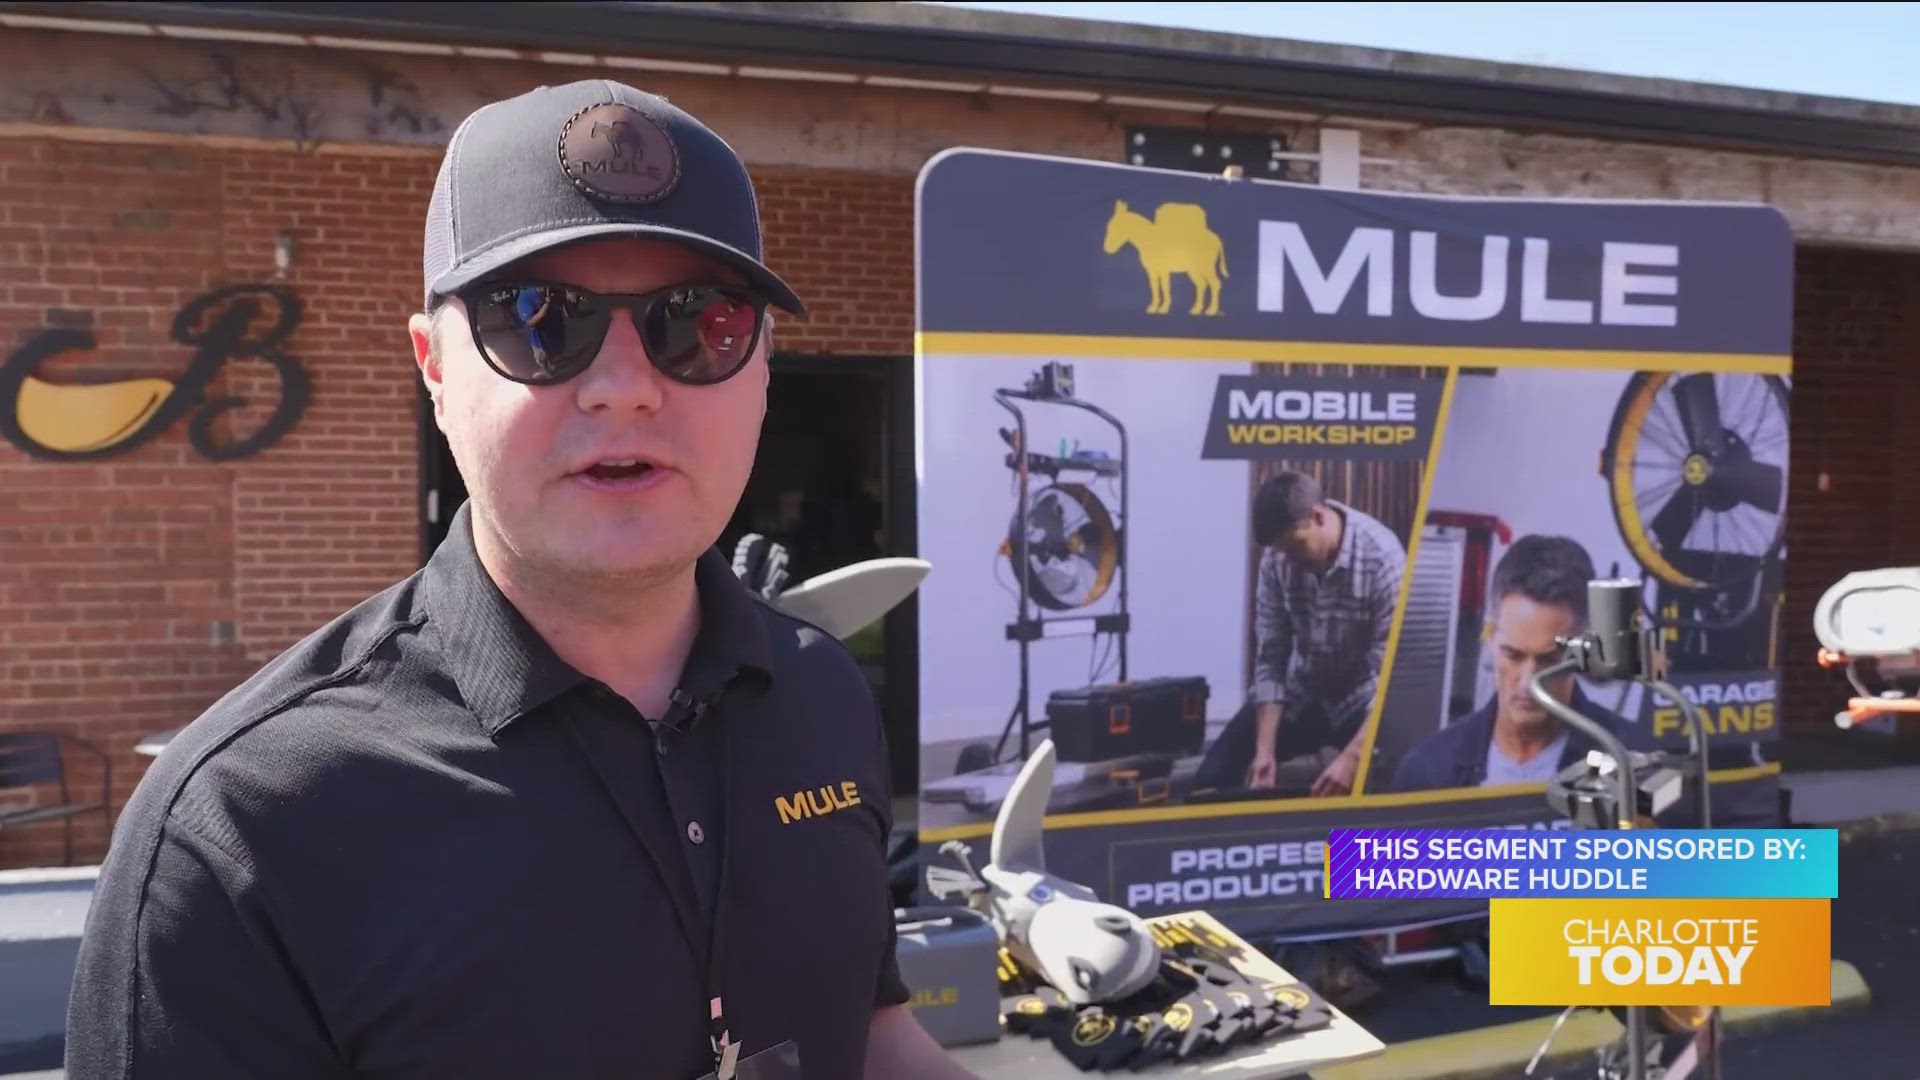 Hardware Huddle Features Mule Products